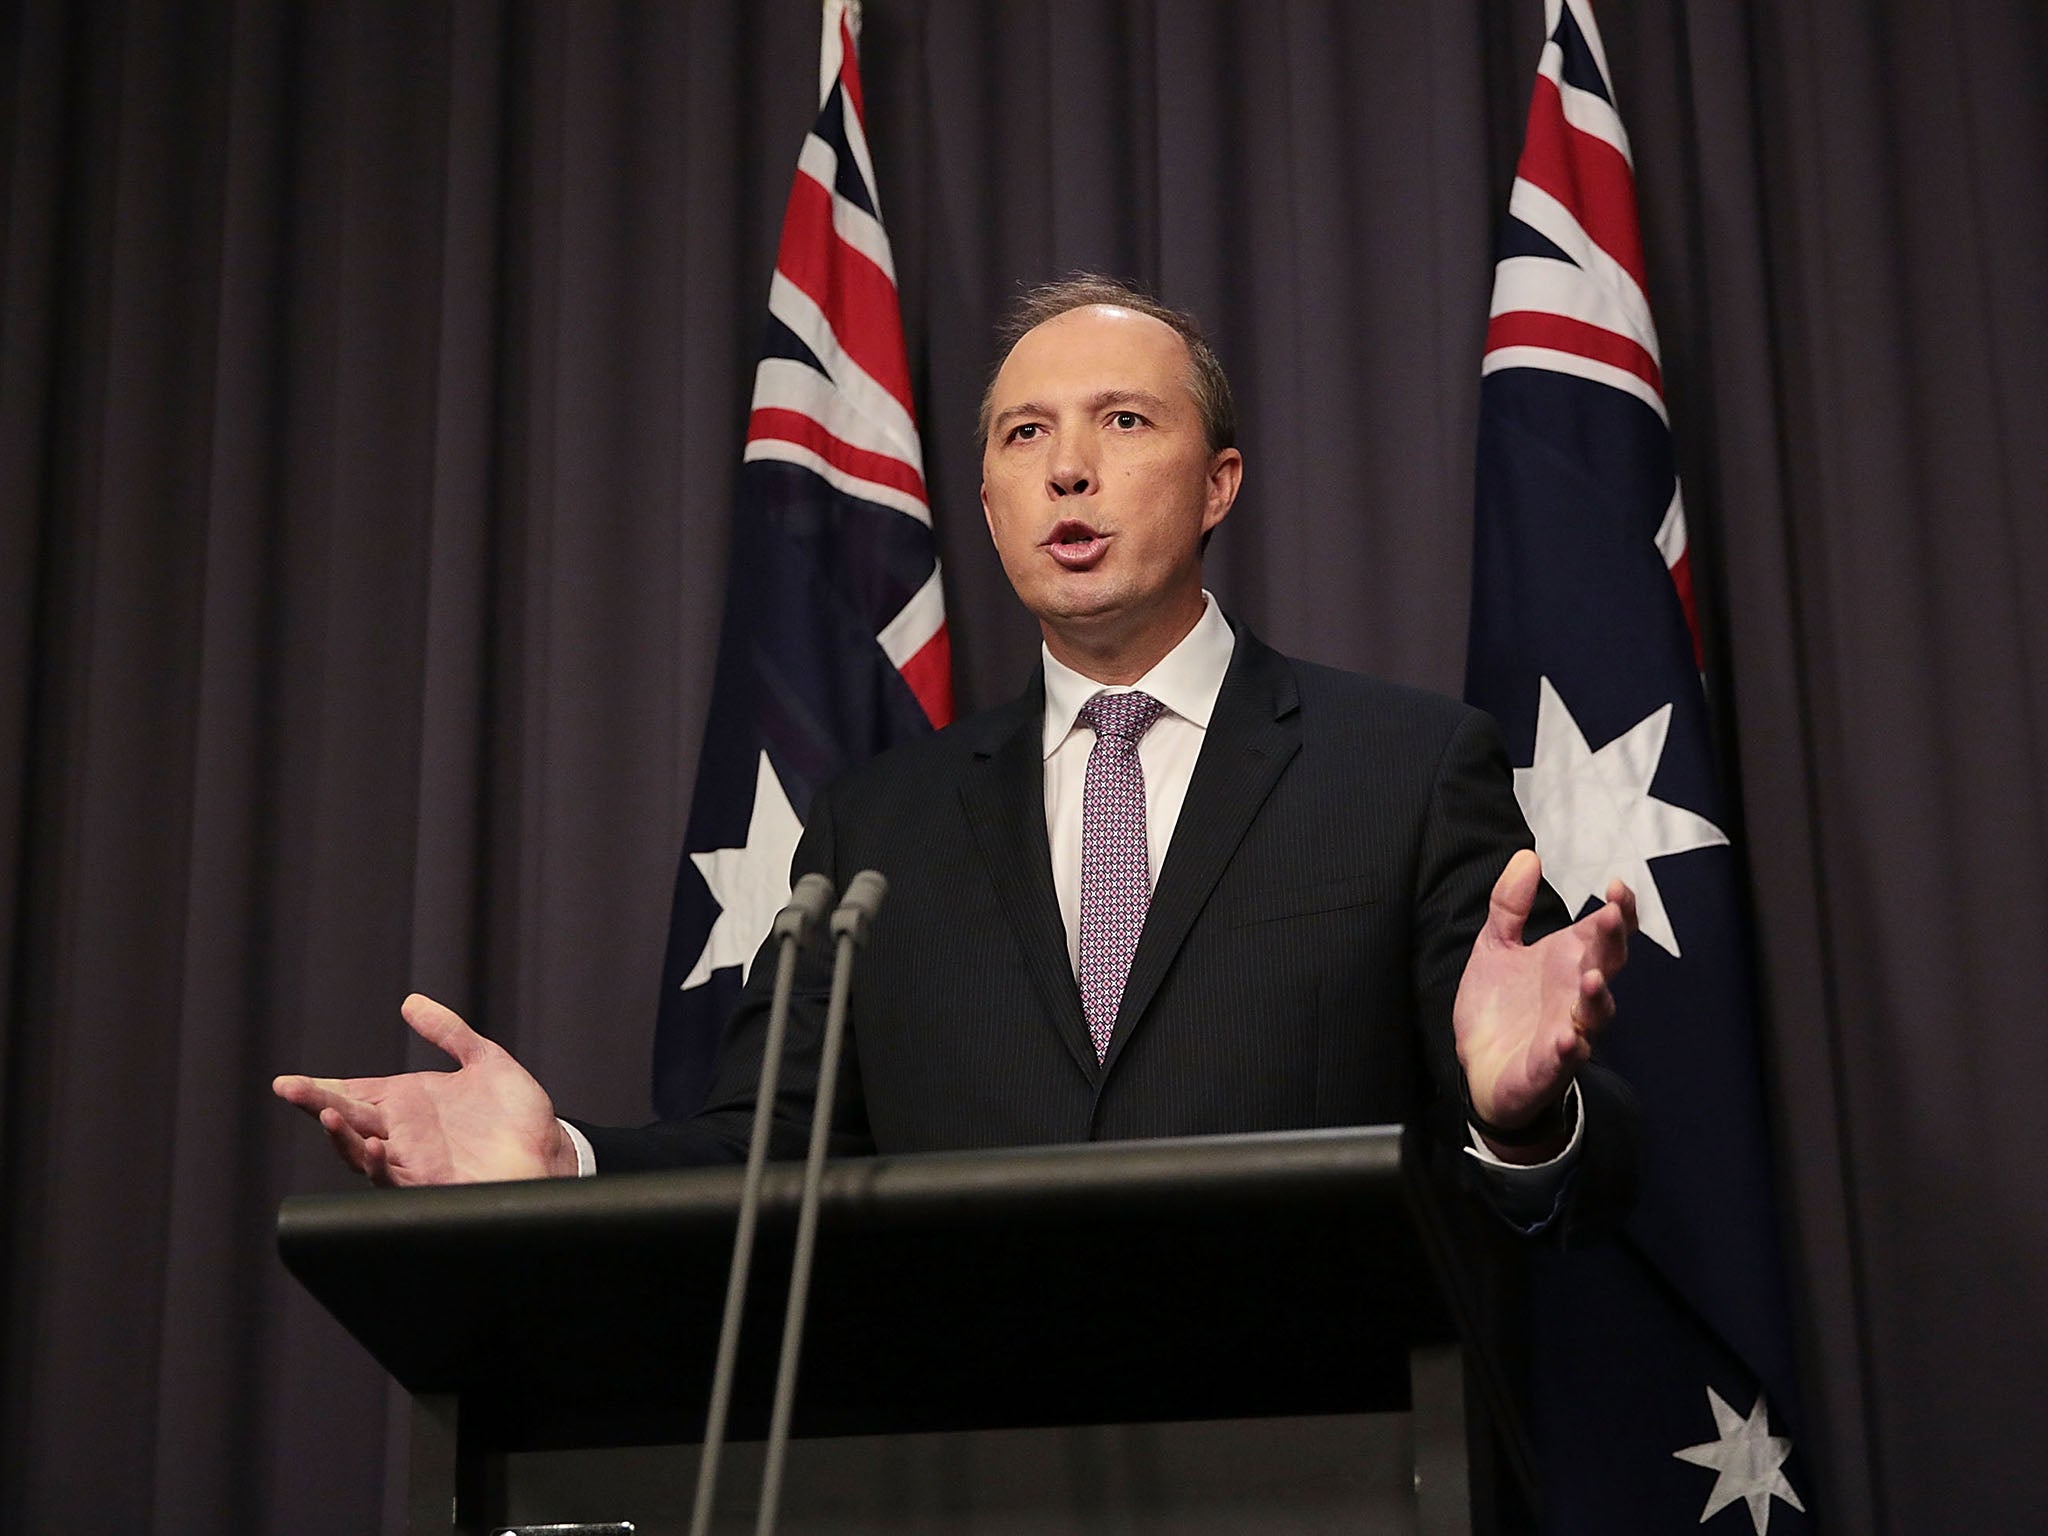 Immigration Minister Peter Dutton speaks to the media at Parliament House on May 3, 2016 in Canberra, Australia.